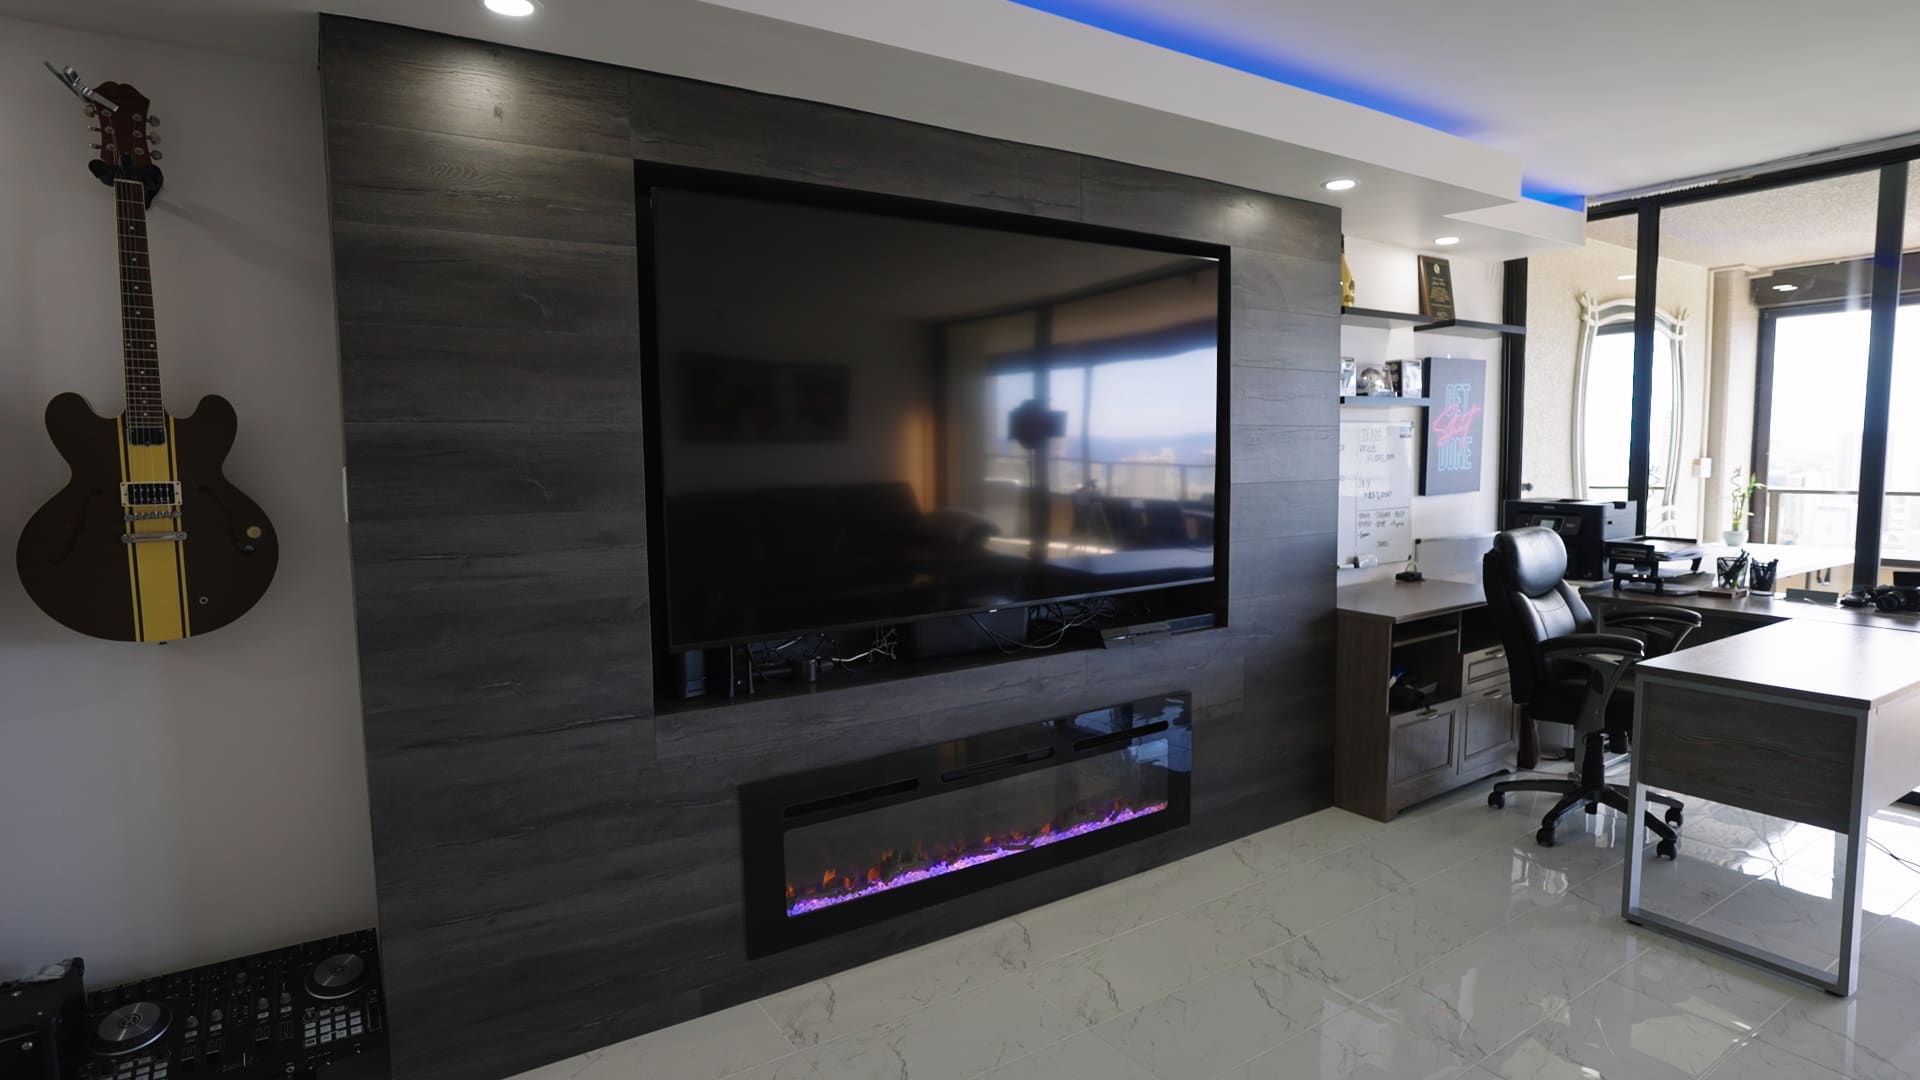 Mateo had an entertainment center and electric fireplace custom-built for his living room.